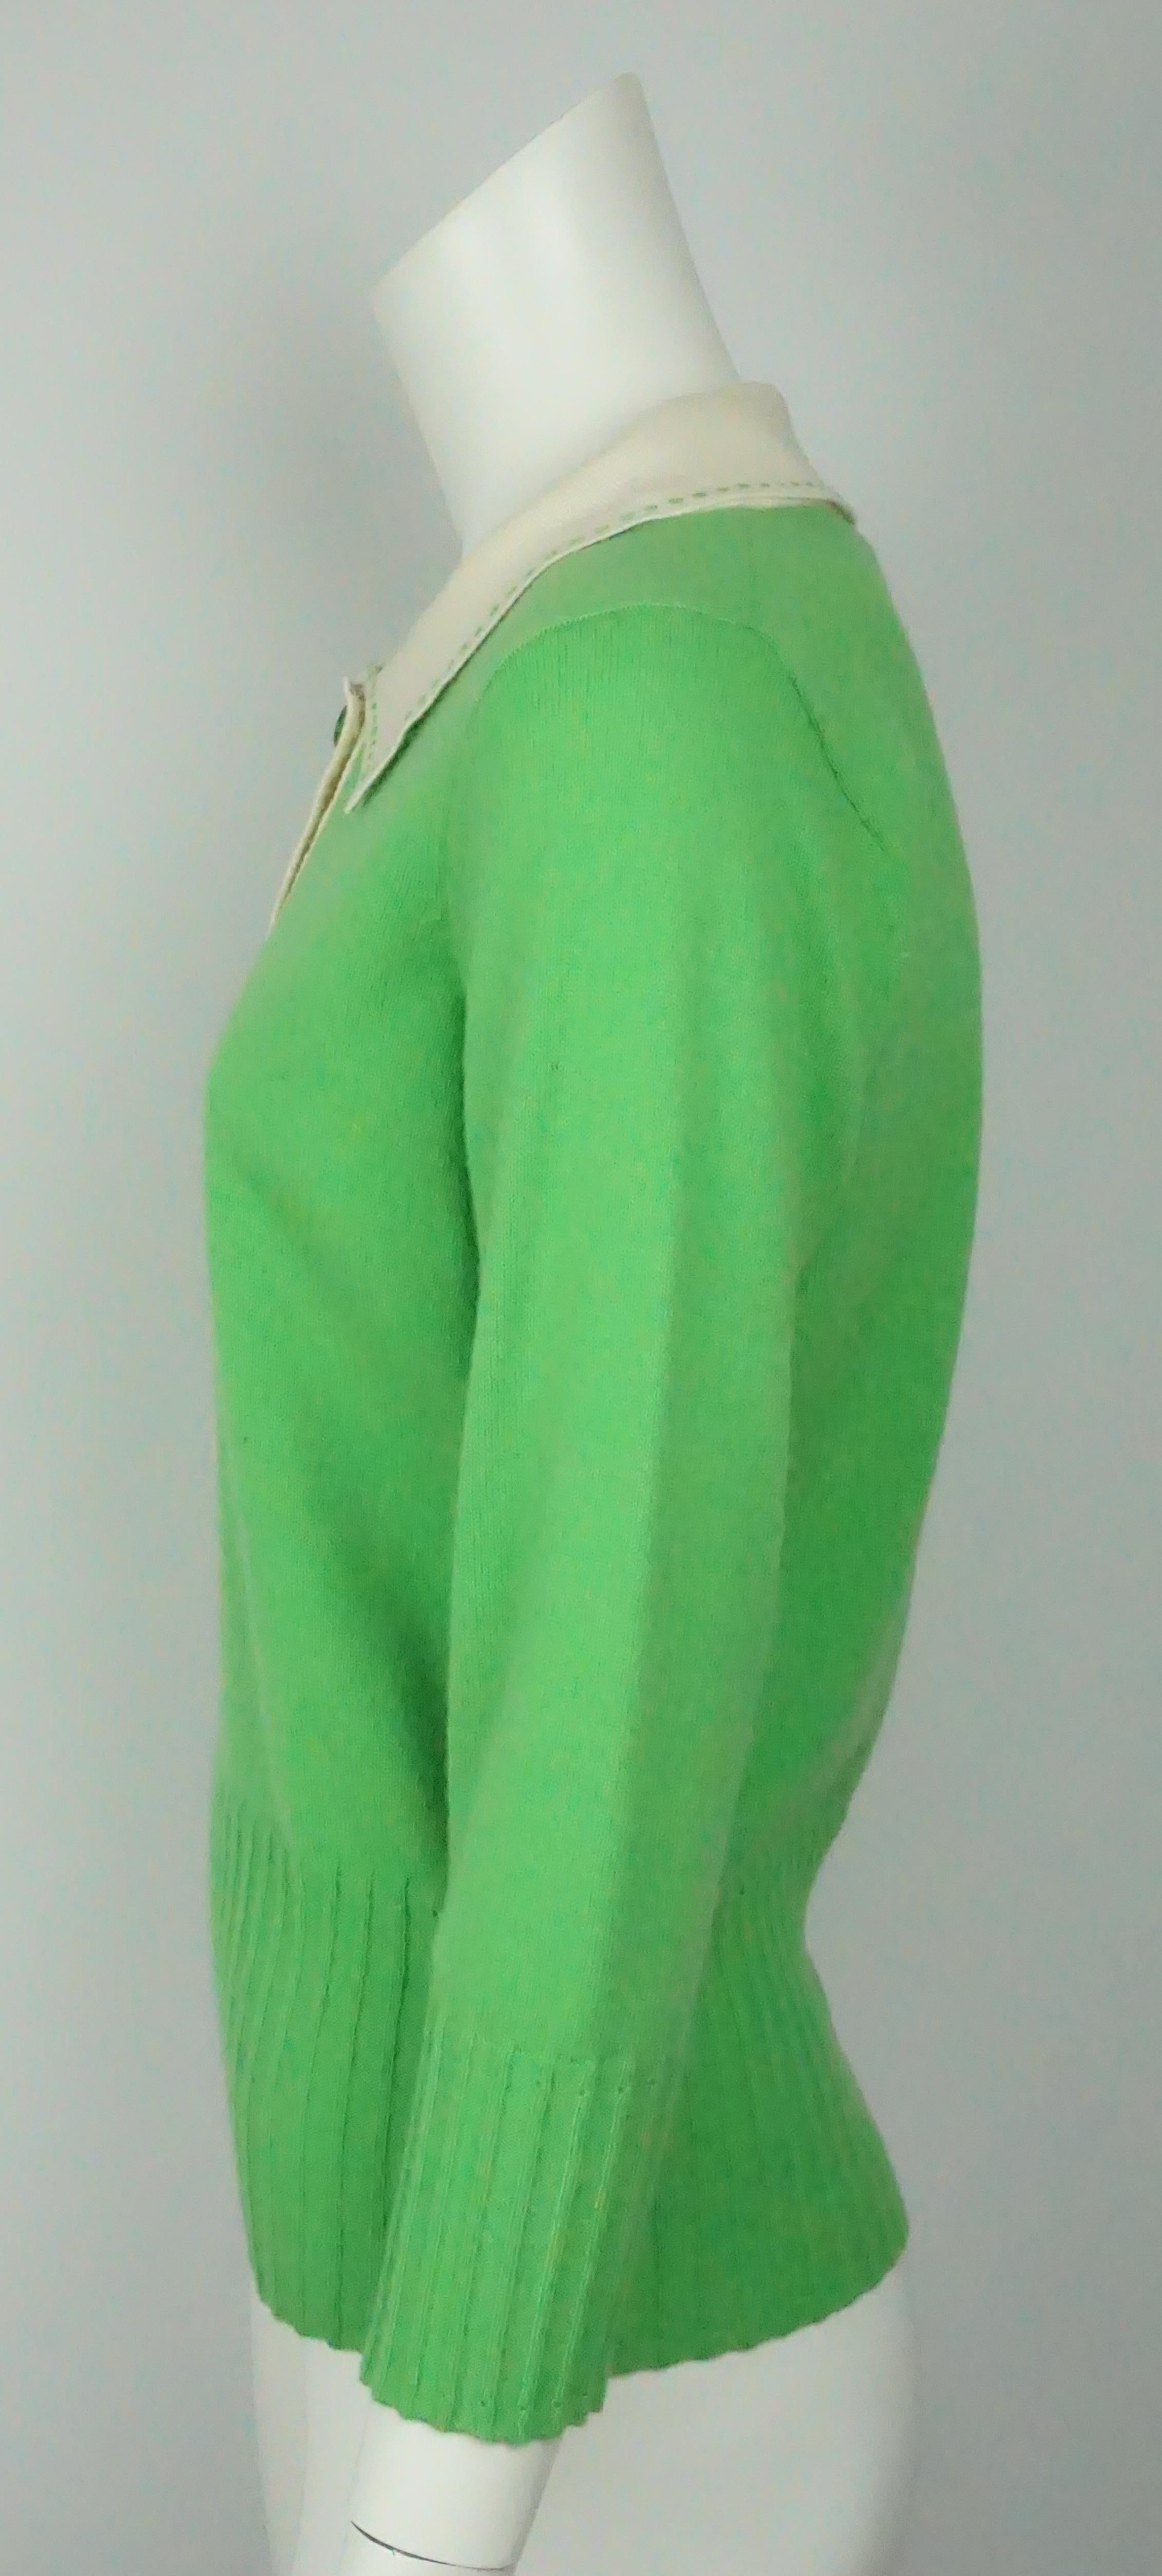 Milly Green & Ivory Sweater - Medium   This beautiful and classic sweater is in excellent condition. It is completely made of cashmere and has a 3/4 length sleeve. Around the neck there is an ivory colored collar that has green stitching on the